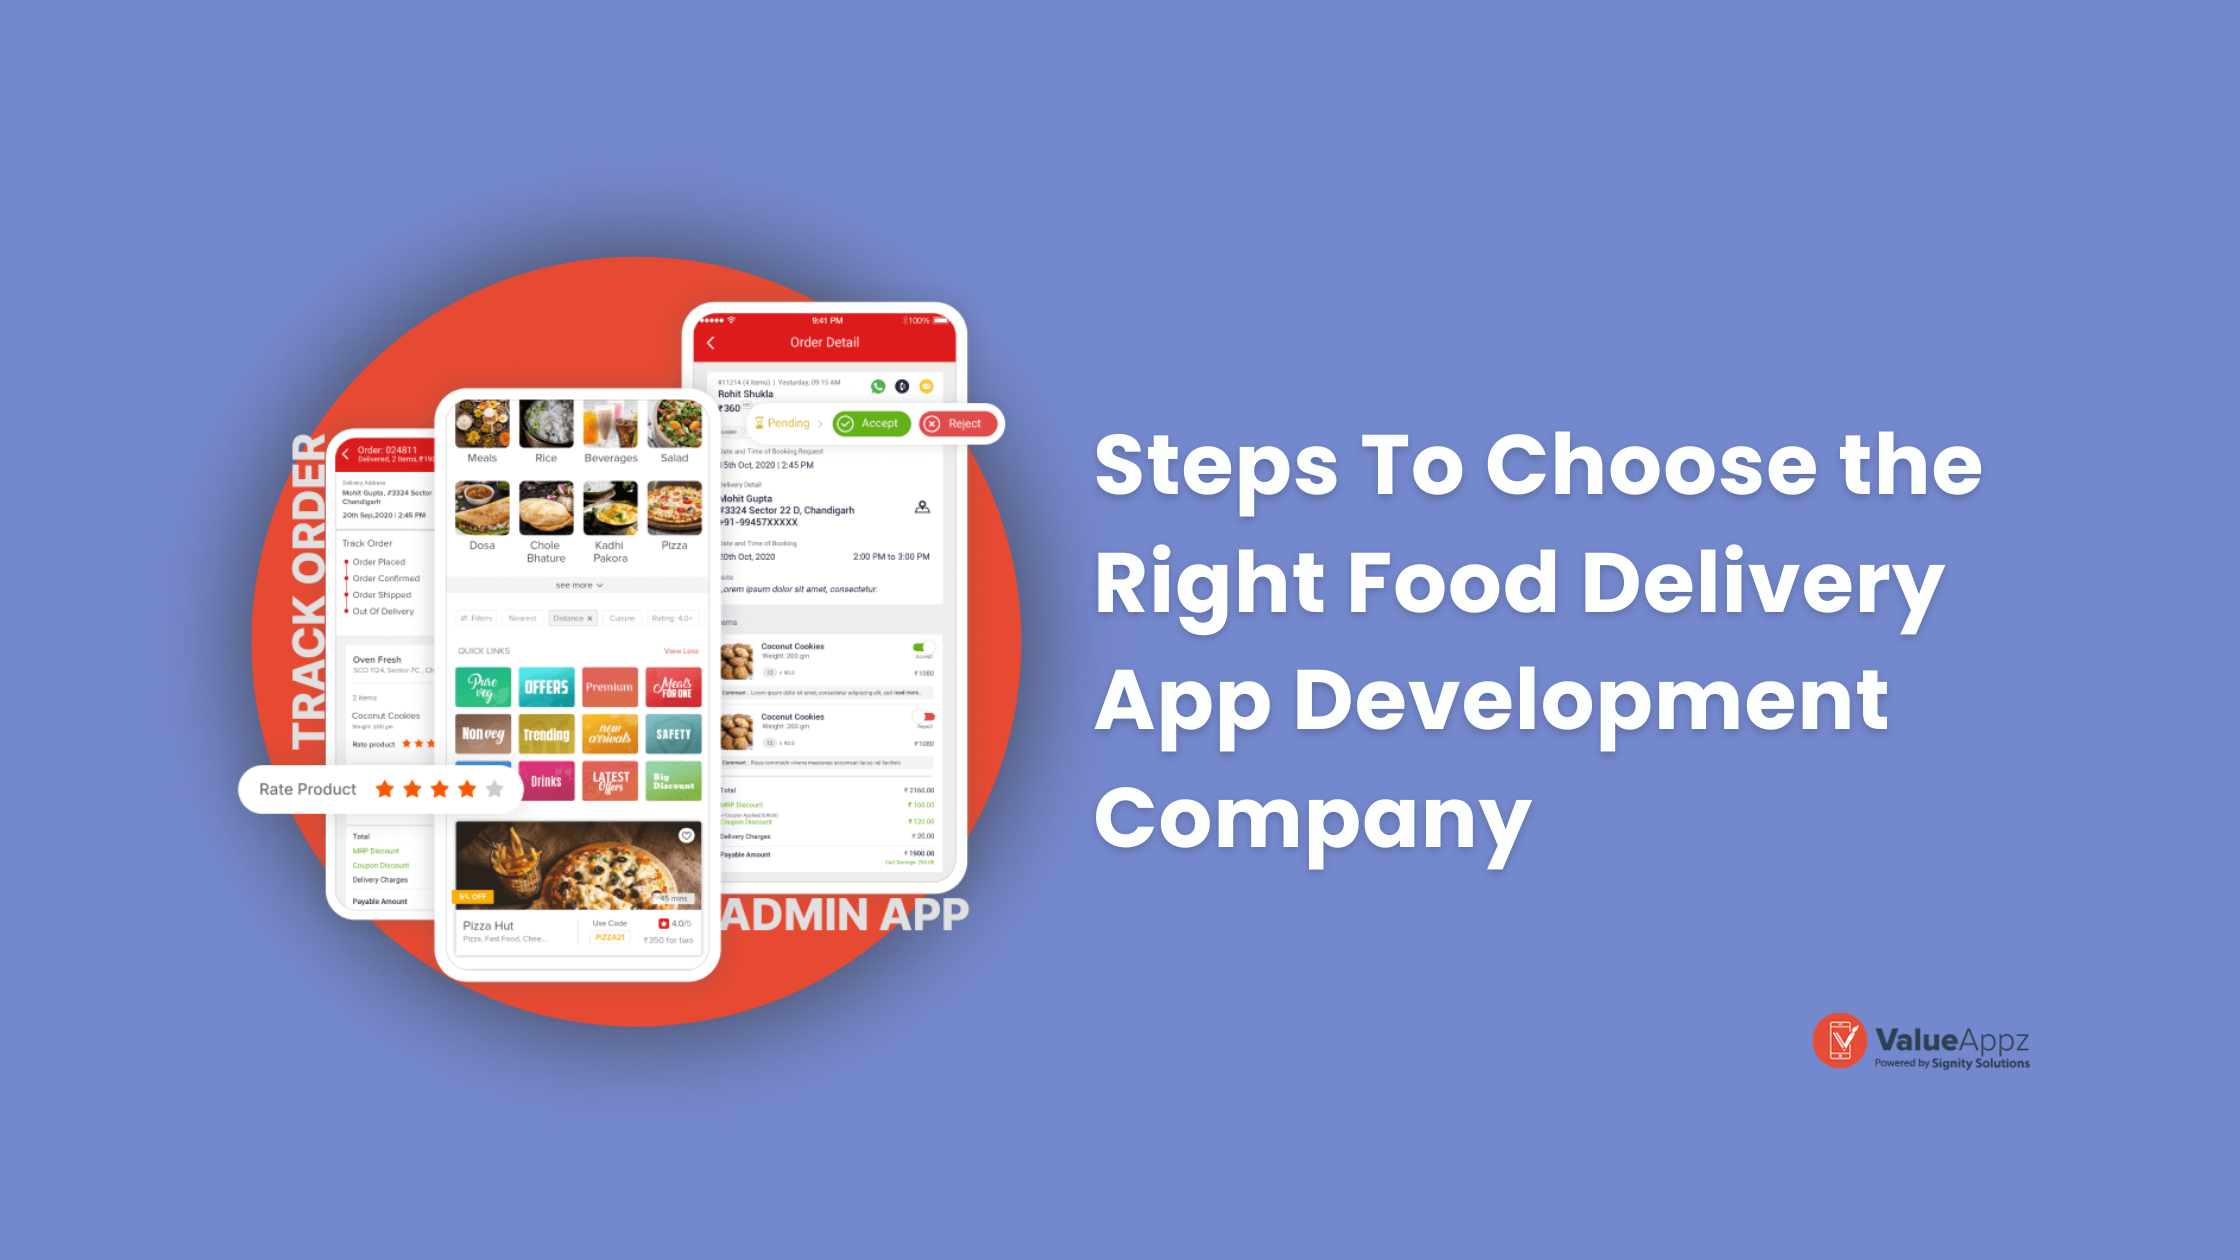 7 Steps to Choose the Right Food Delivery App Development Company